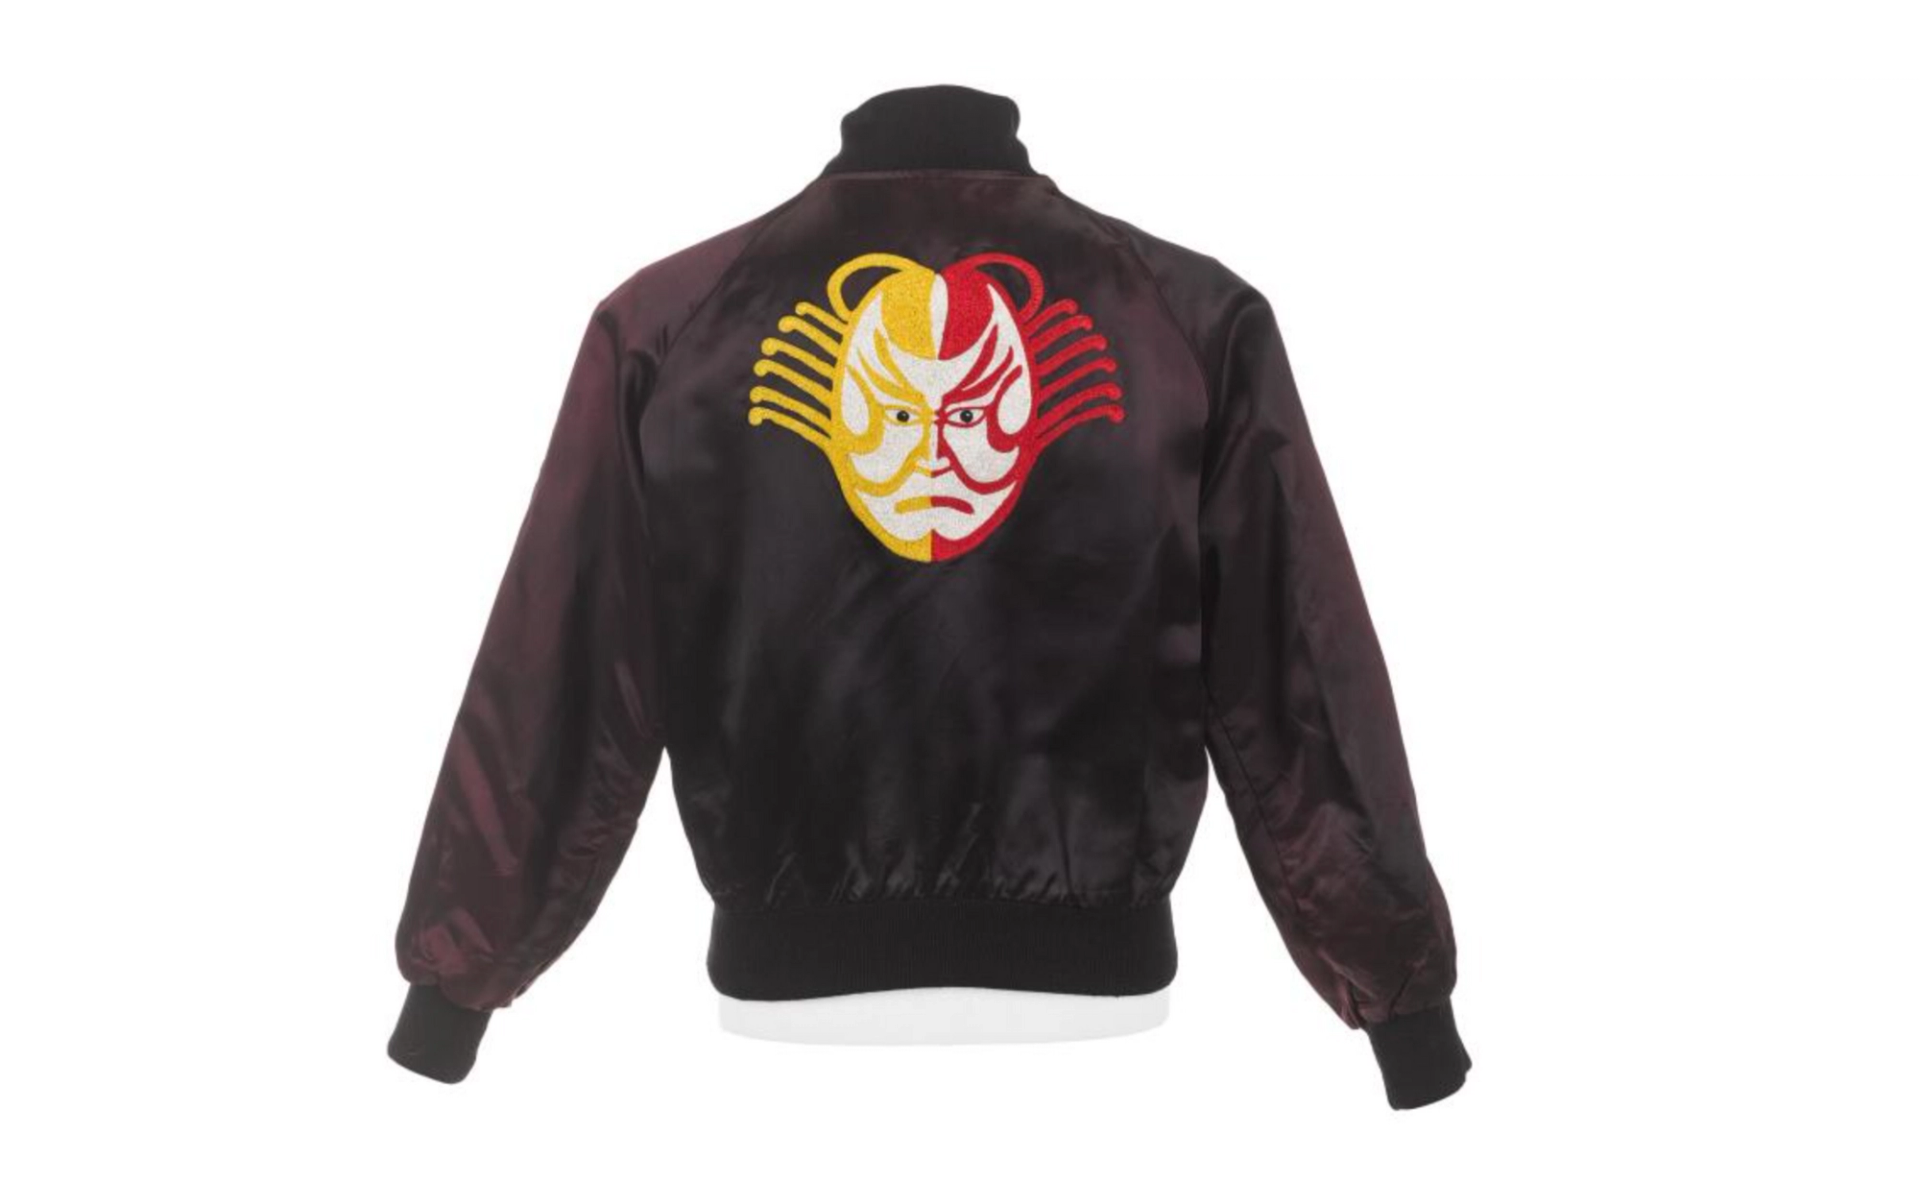 A two-tone black and mulberry satin bomber jacket embellished with a vivid appliquéd design of a Kabuki Actor’s head in densely embroidered yellow, scarlet and ivory silk thread.